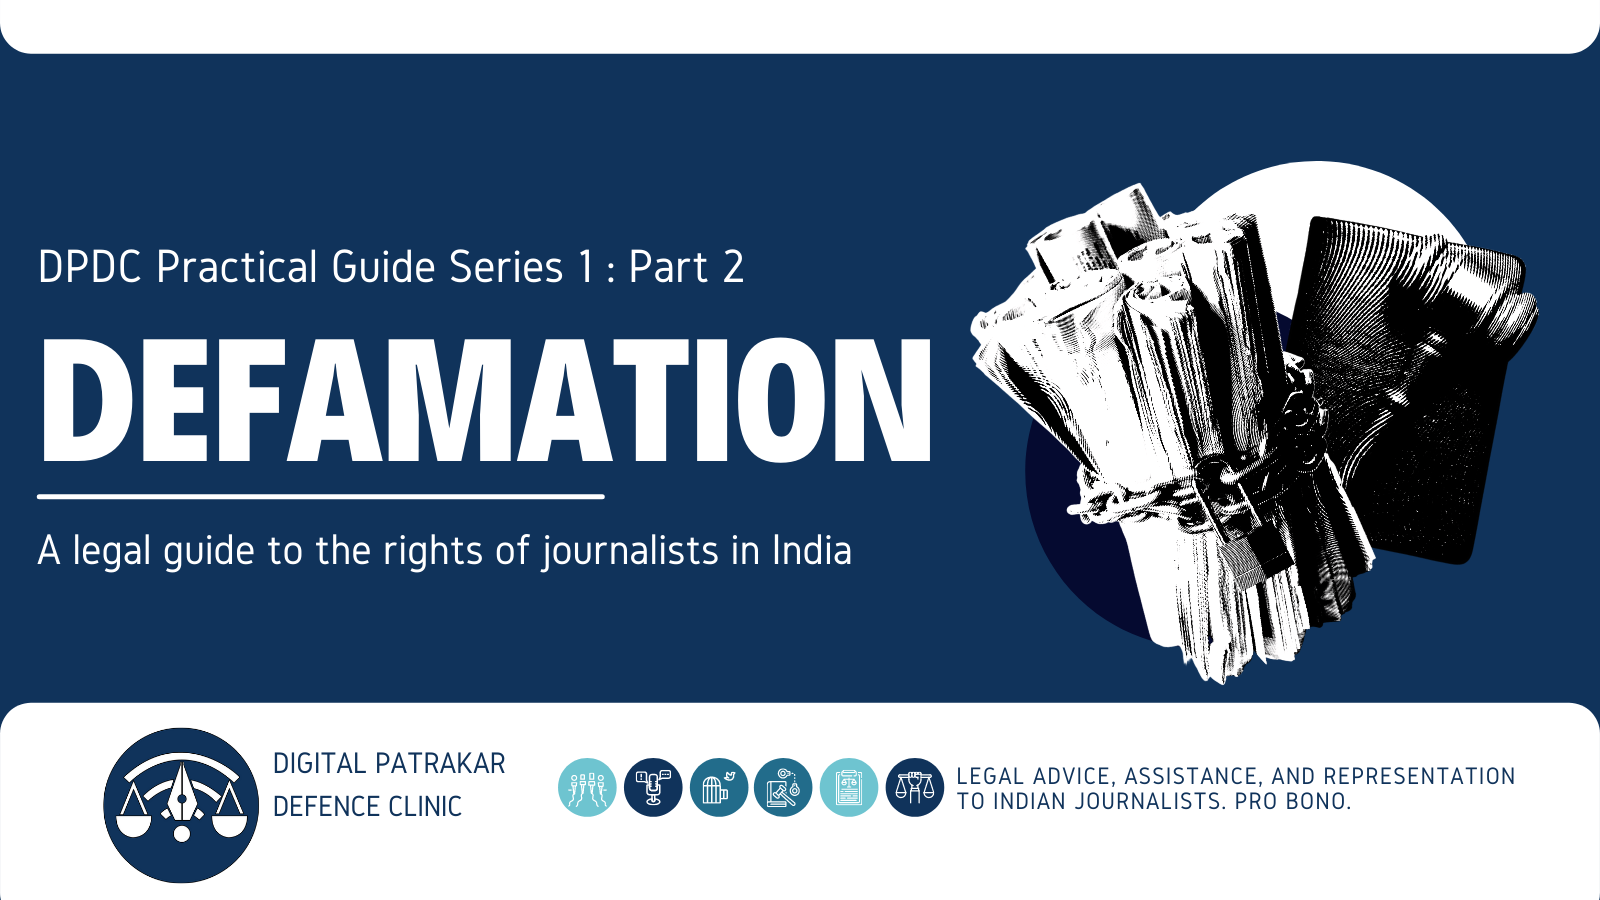 DPDC PRACTICAL GUIDE SERIES  | DEFAMATION